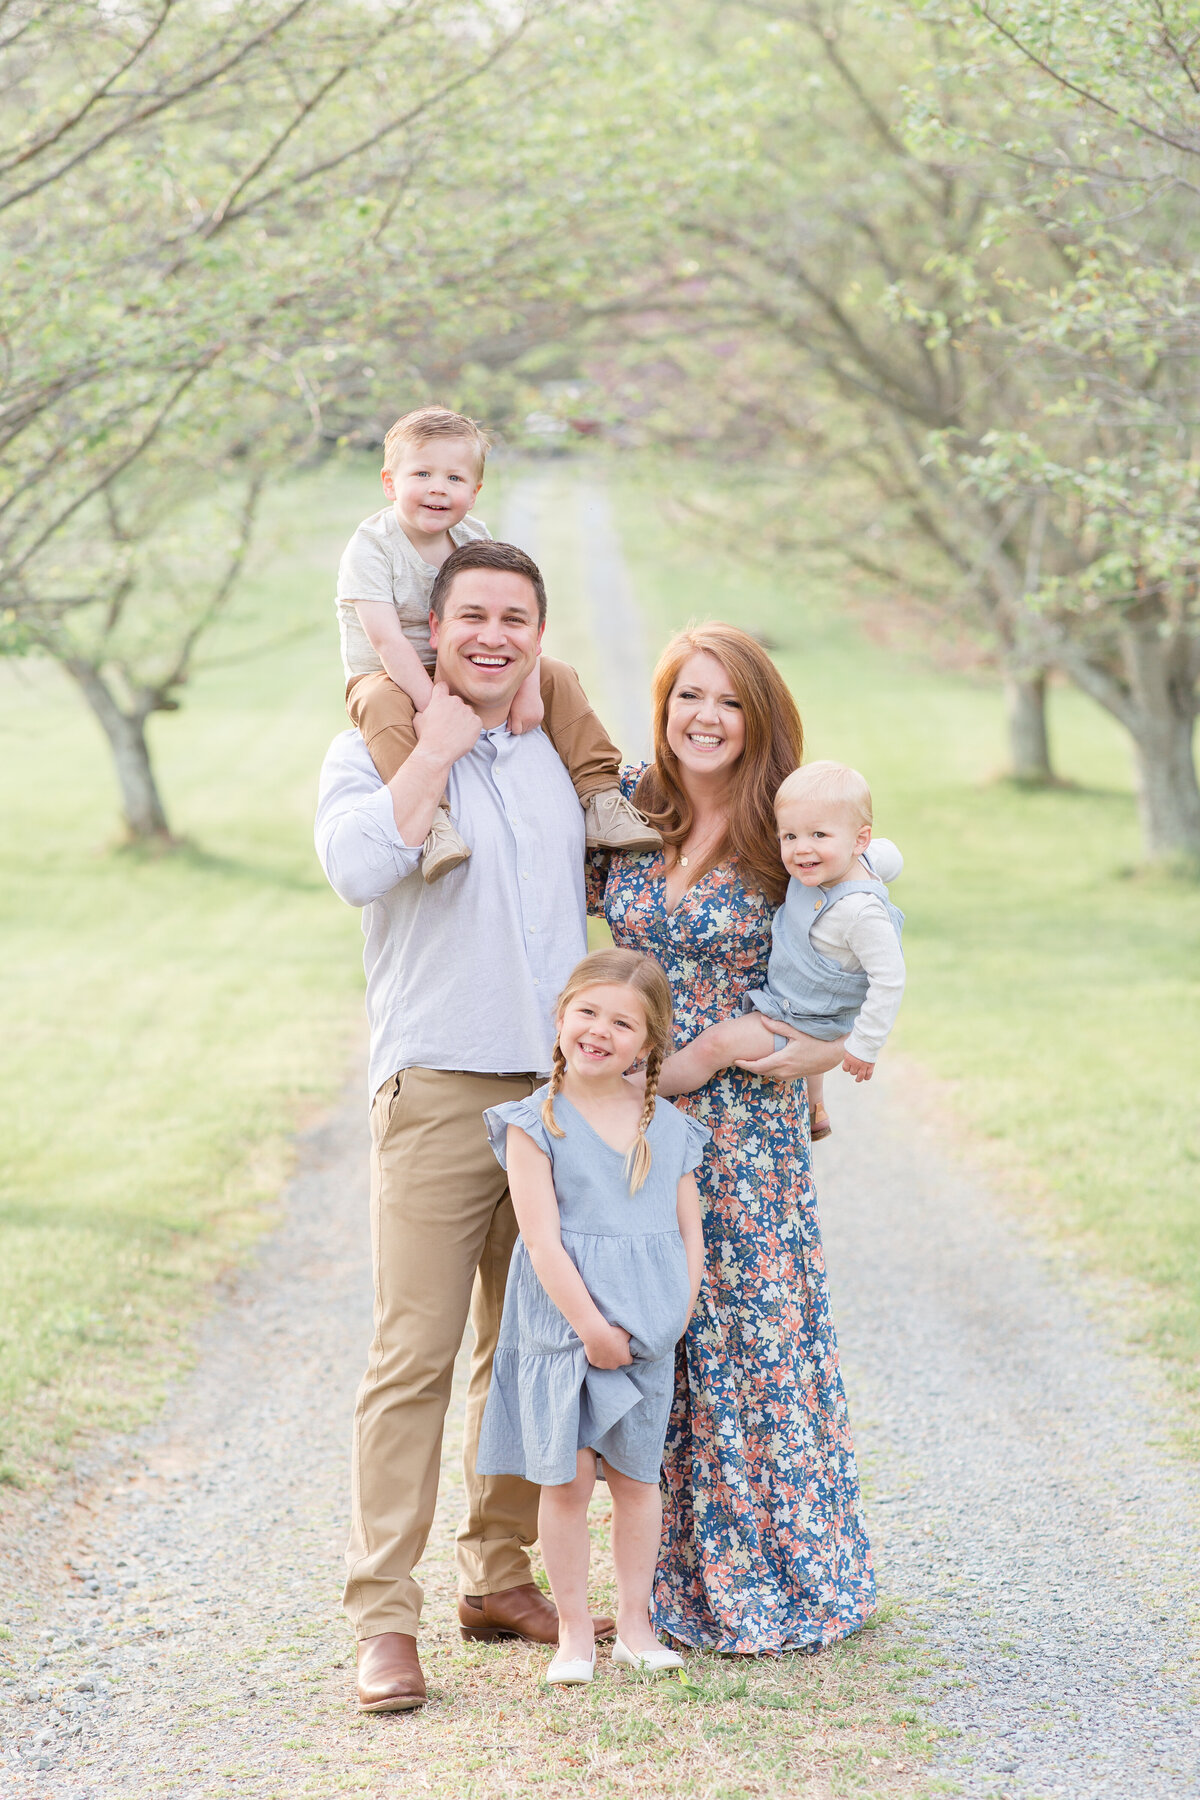 Rebecca Rice Photography Education Family Portrait Financial Freedom Thriving Photography Business Educational Resources Grow Your Photo Business Nashville TN Tennessee Free Resources Online Courses Podcast4